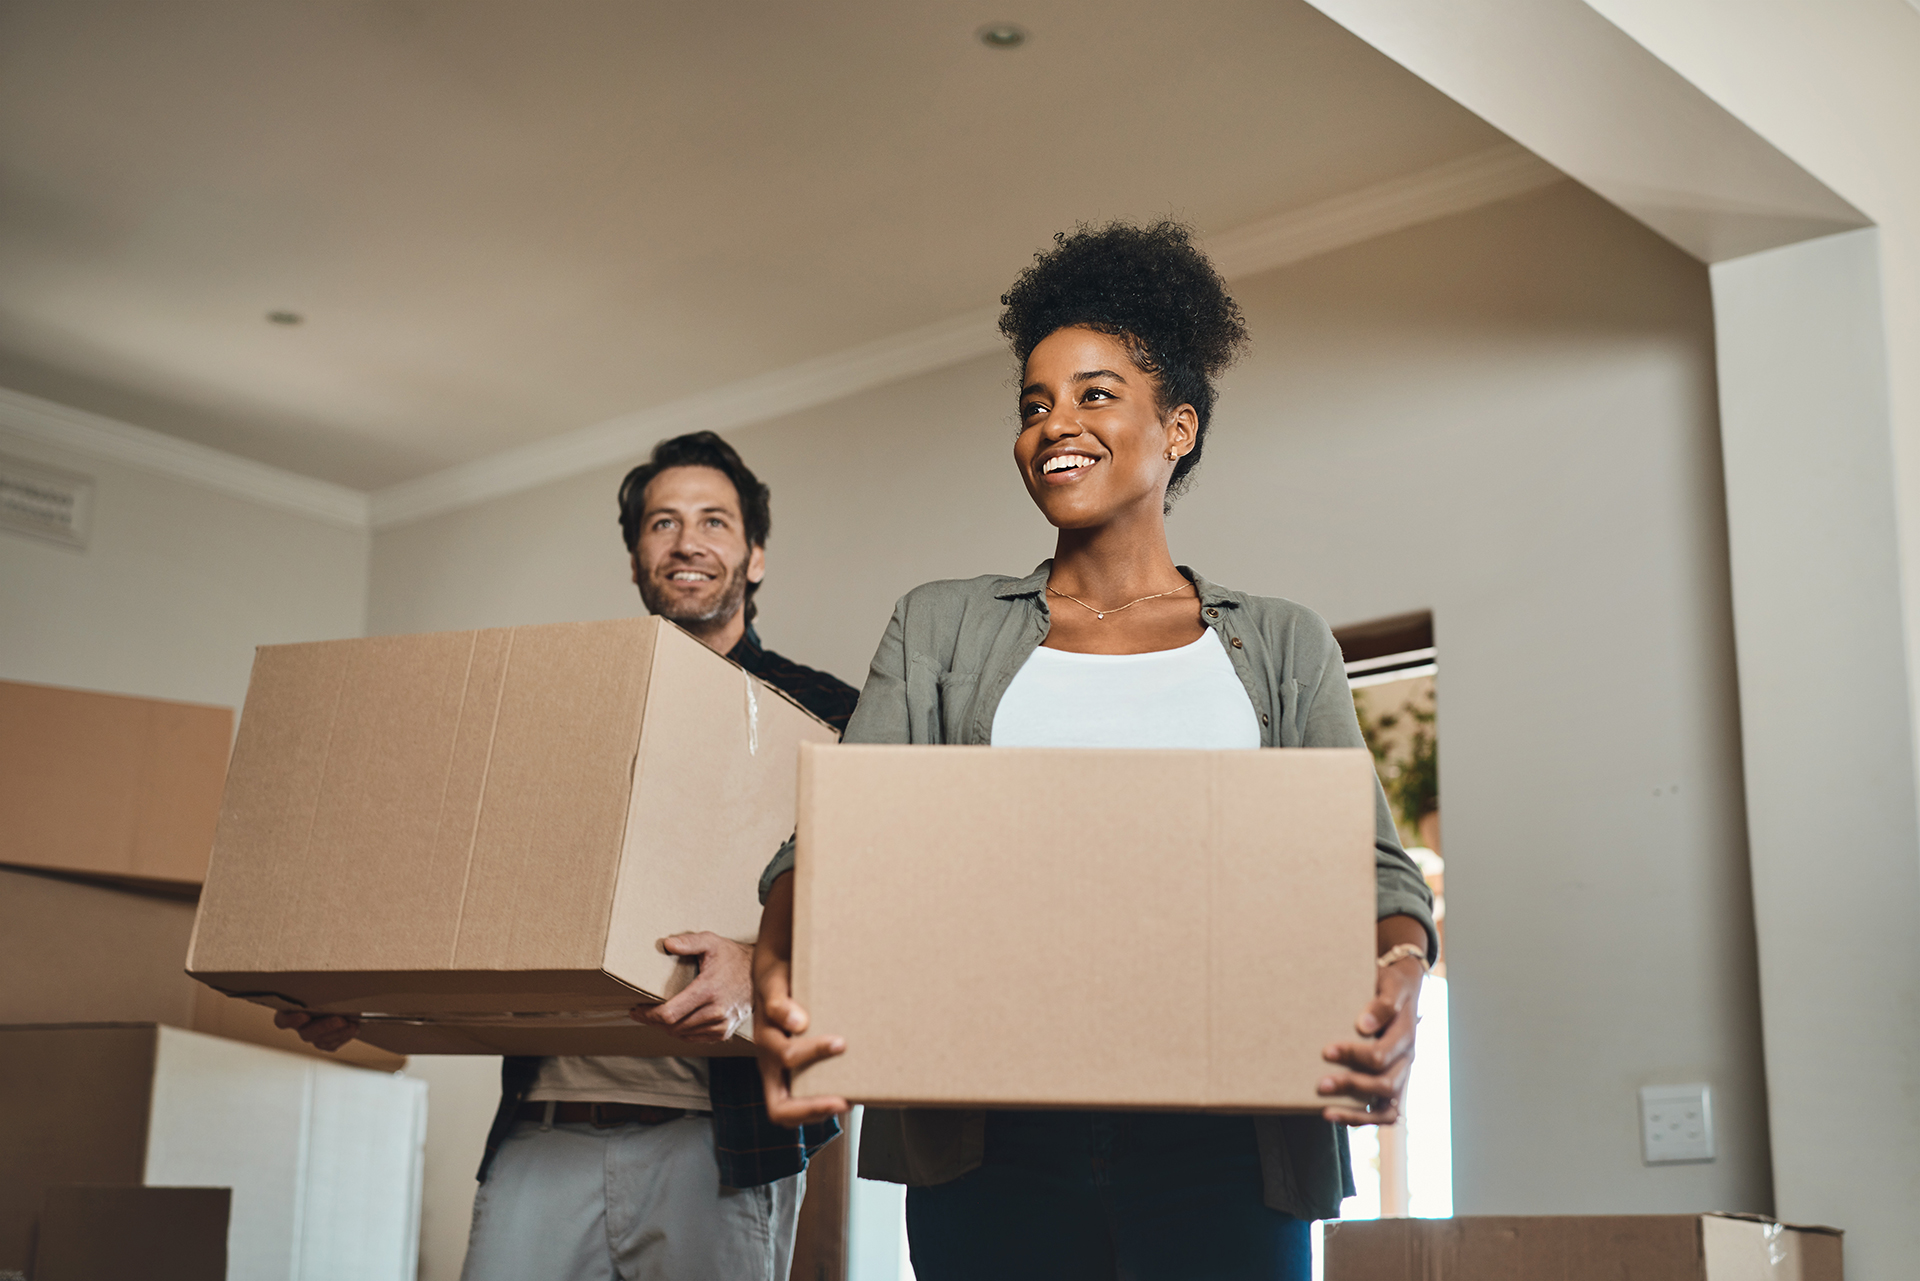 All our tips for a hassle-free move